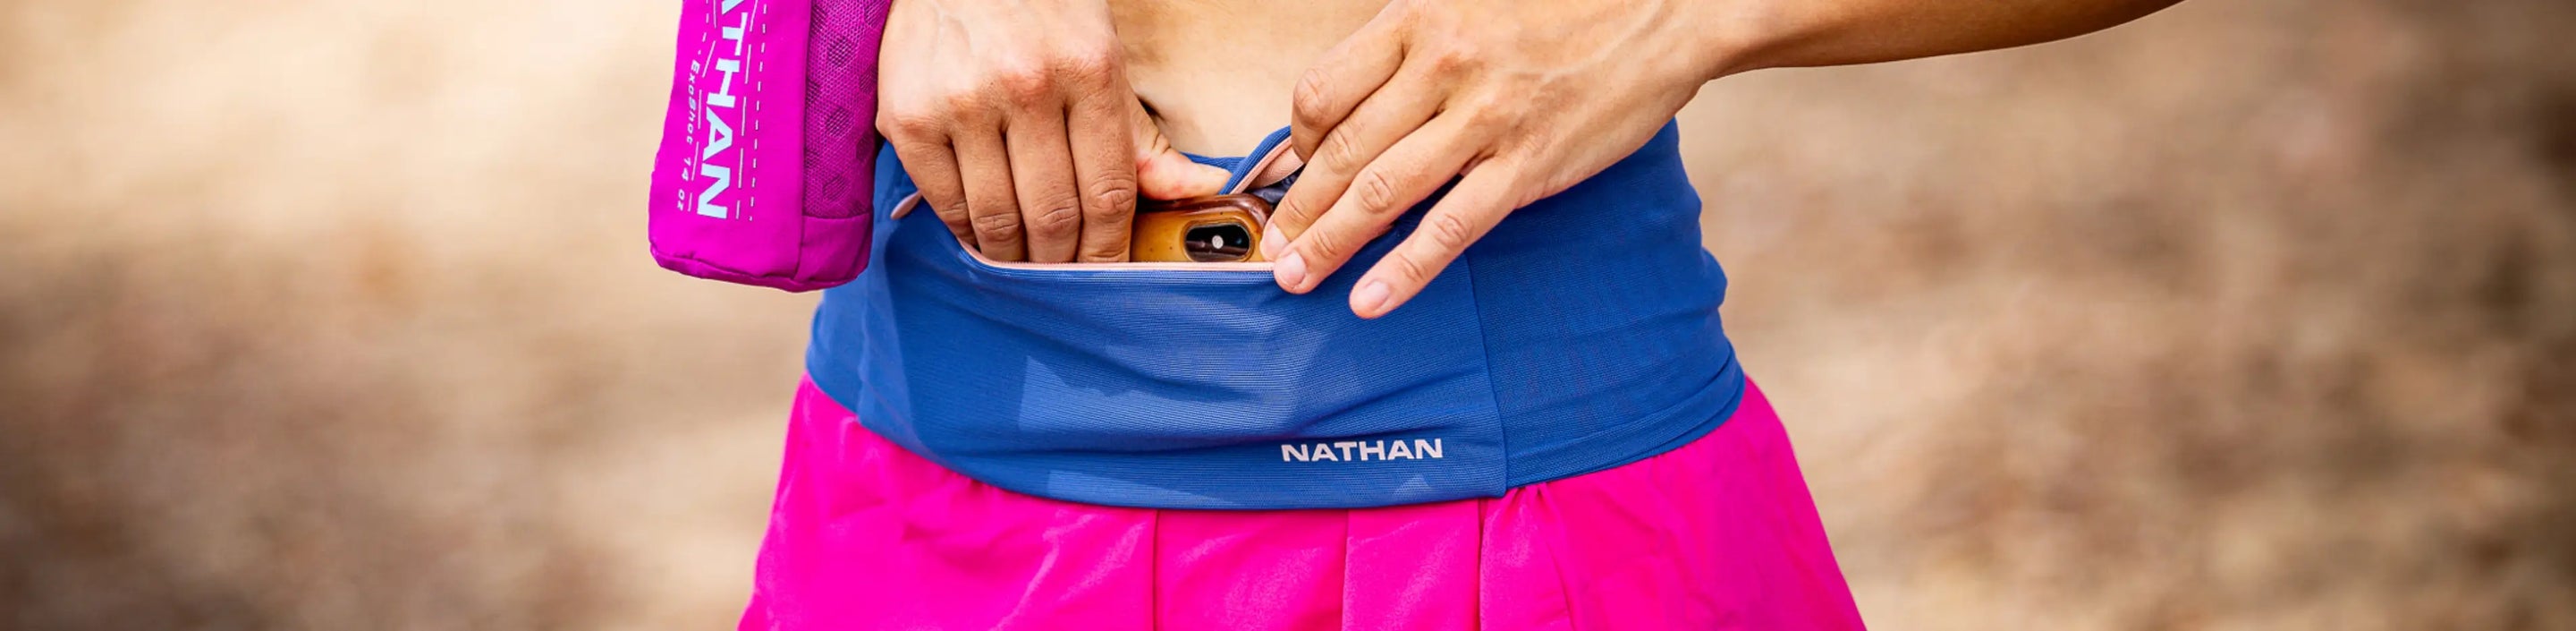 Nathan Sports storage belt Zipster Max in blue